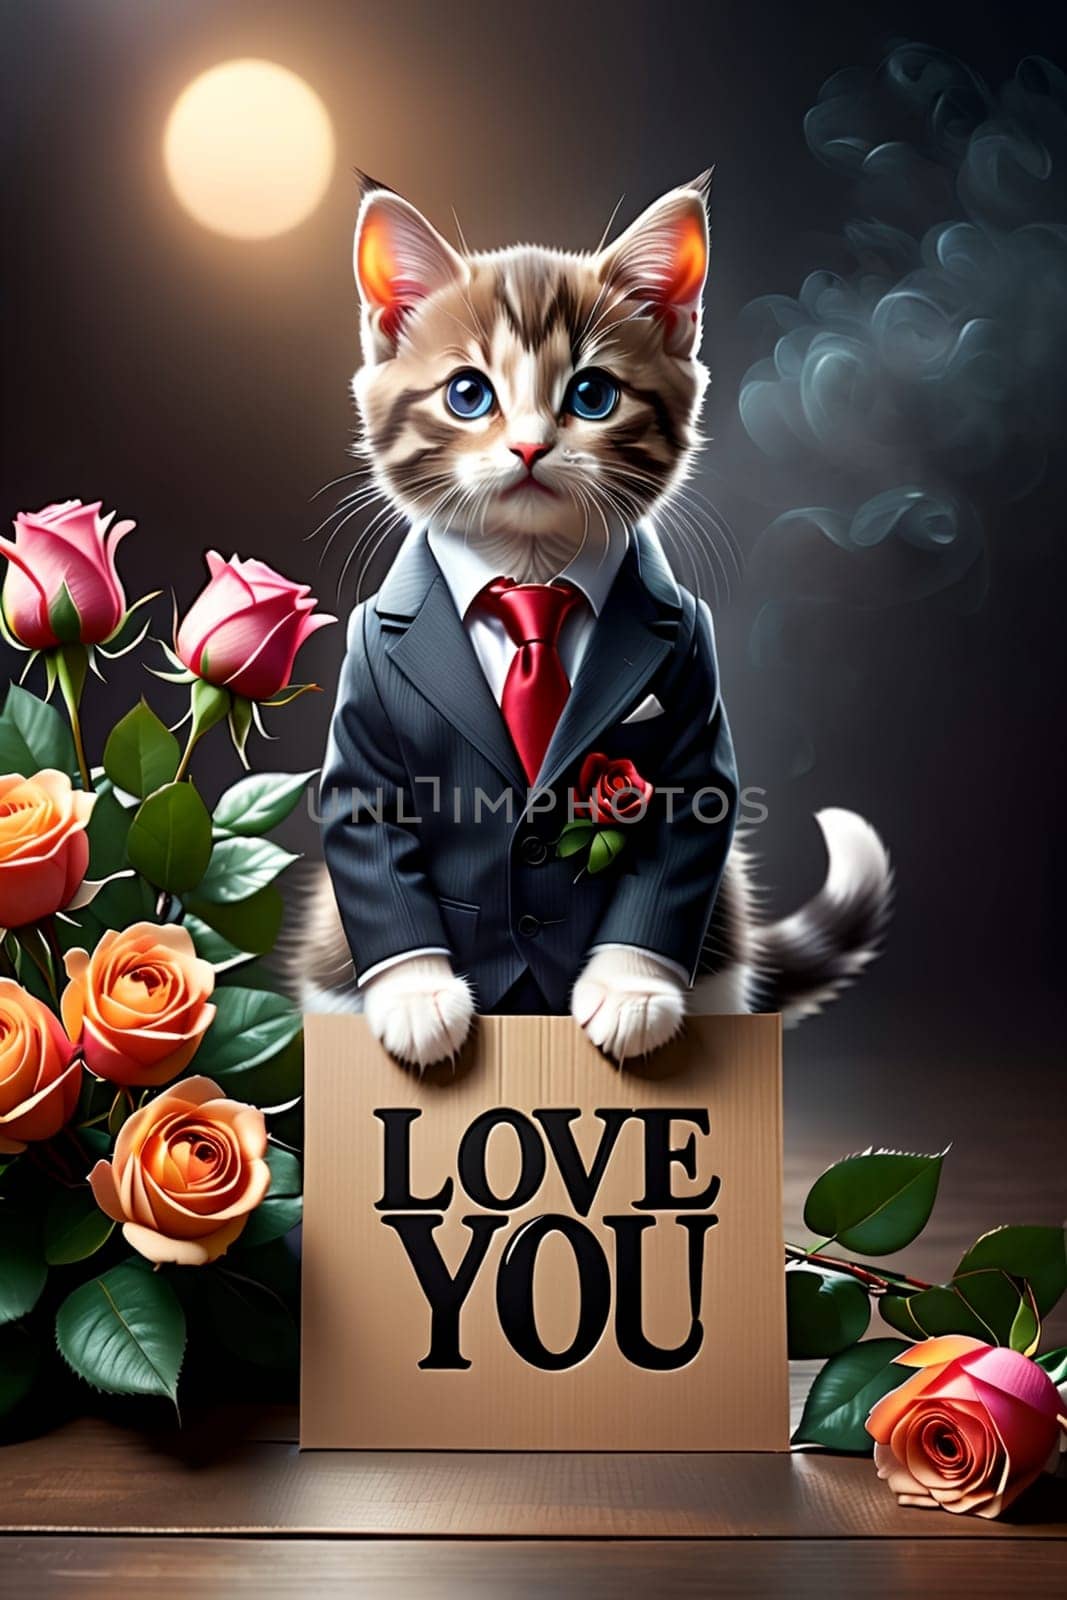 cute cat holding roses and a Love you sign by Rawlik